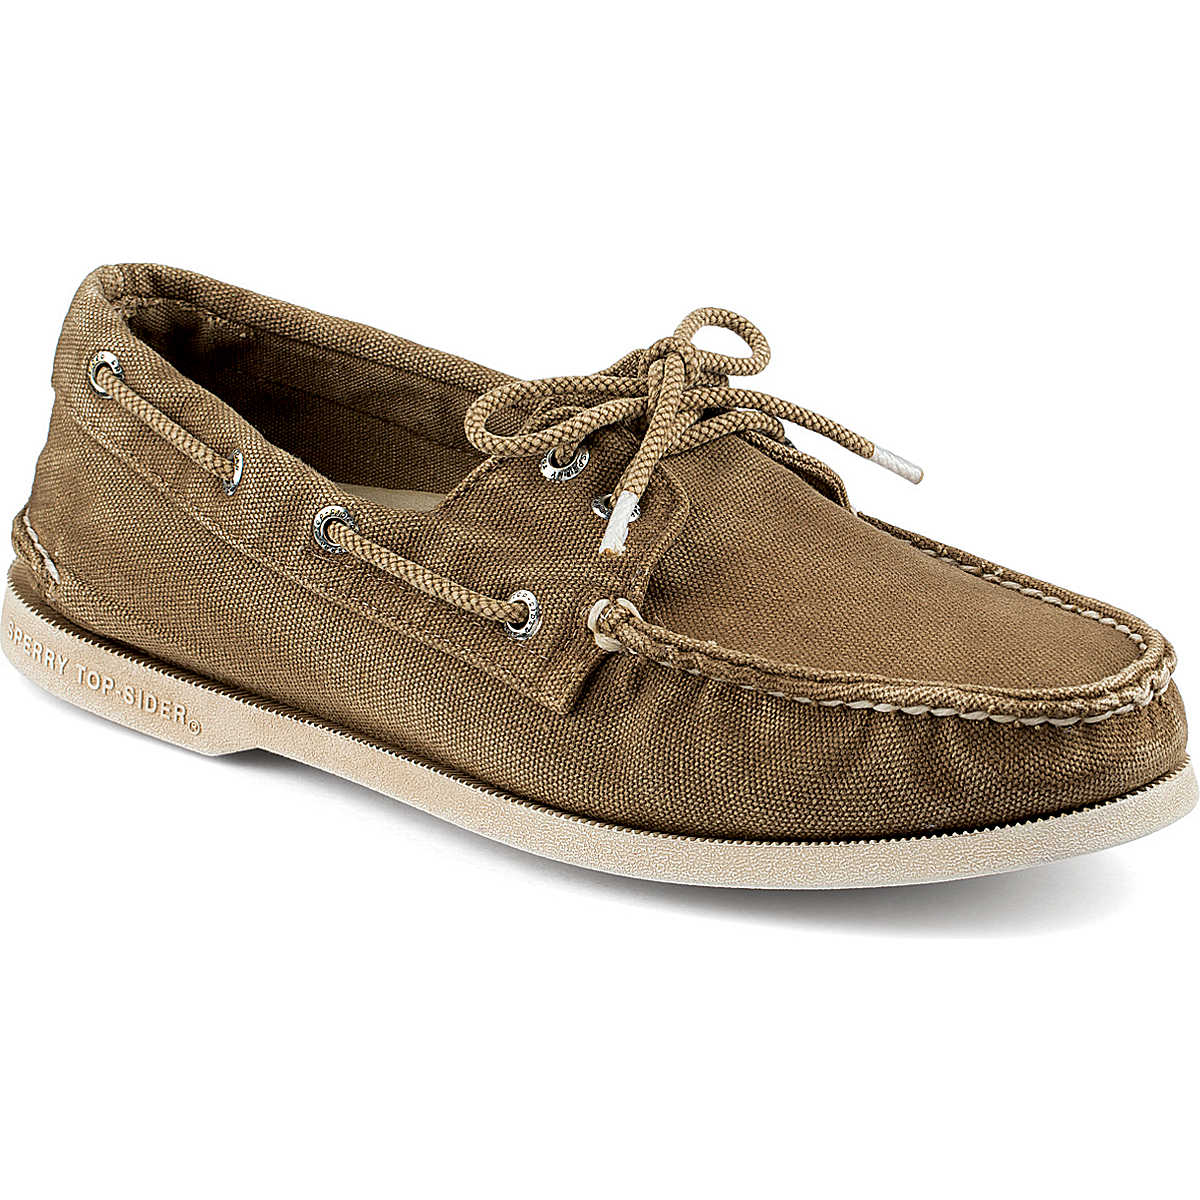 Men's Authentic Original Color Washed Canvas 2-Eye Boat Shoe - Sperry